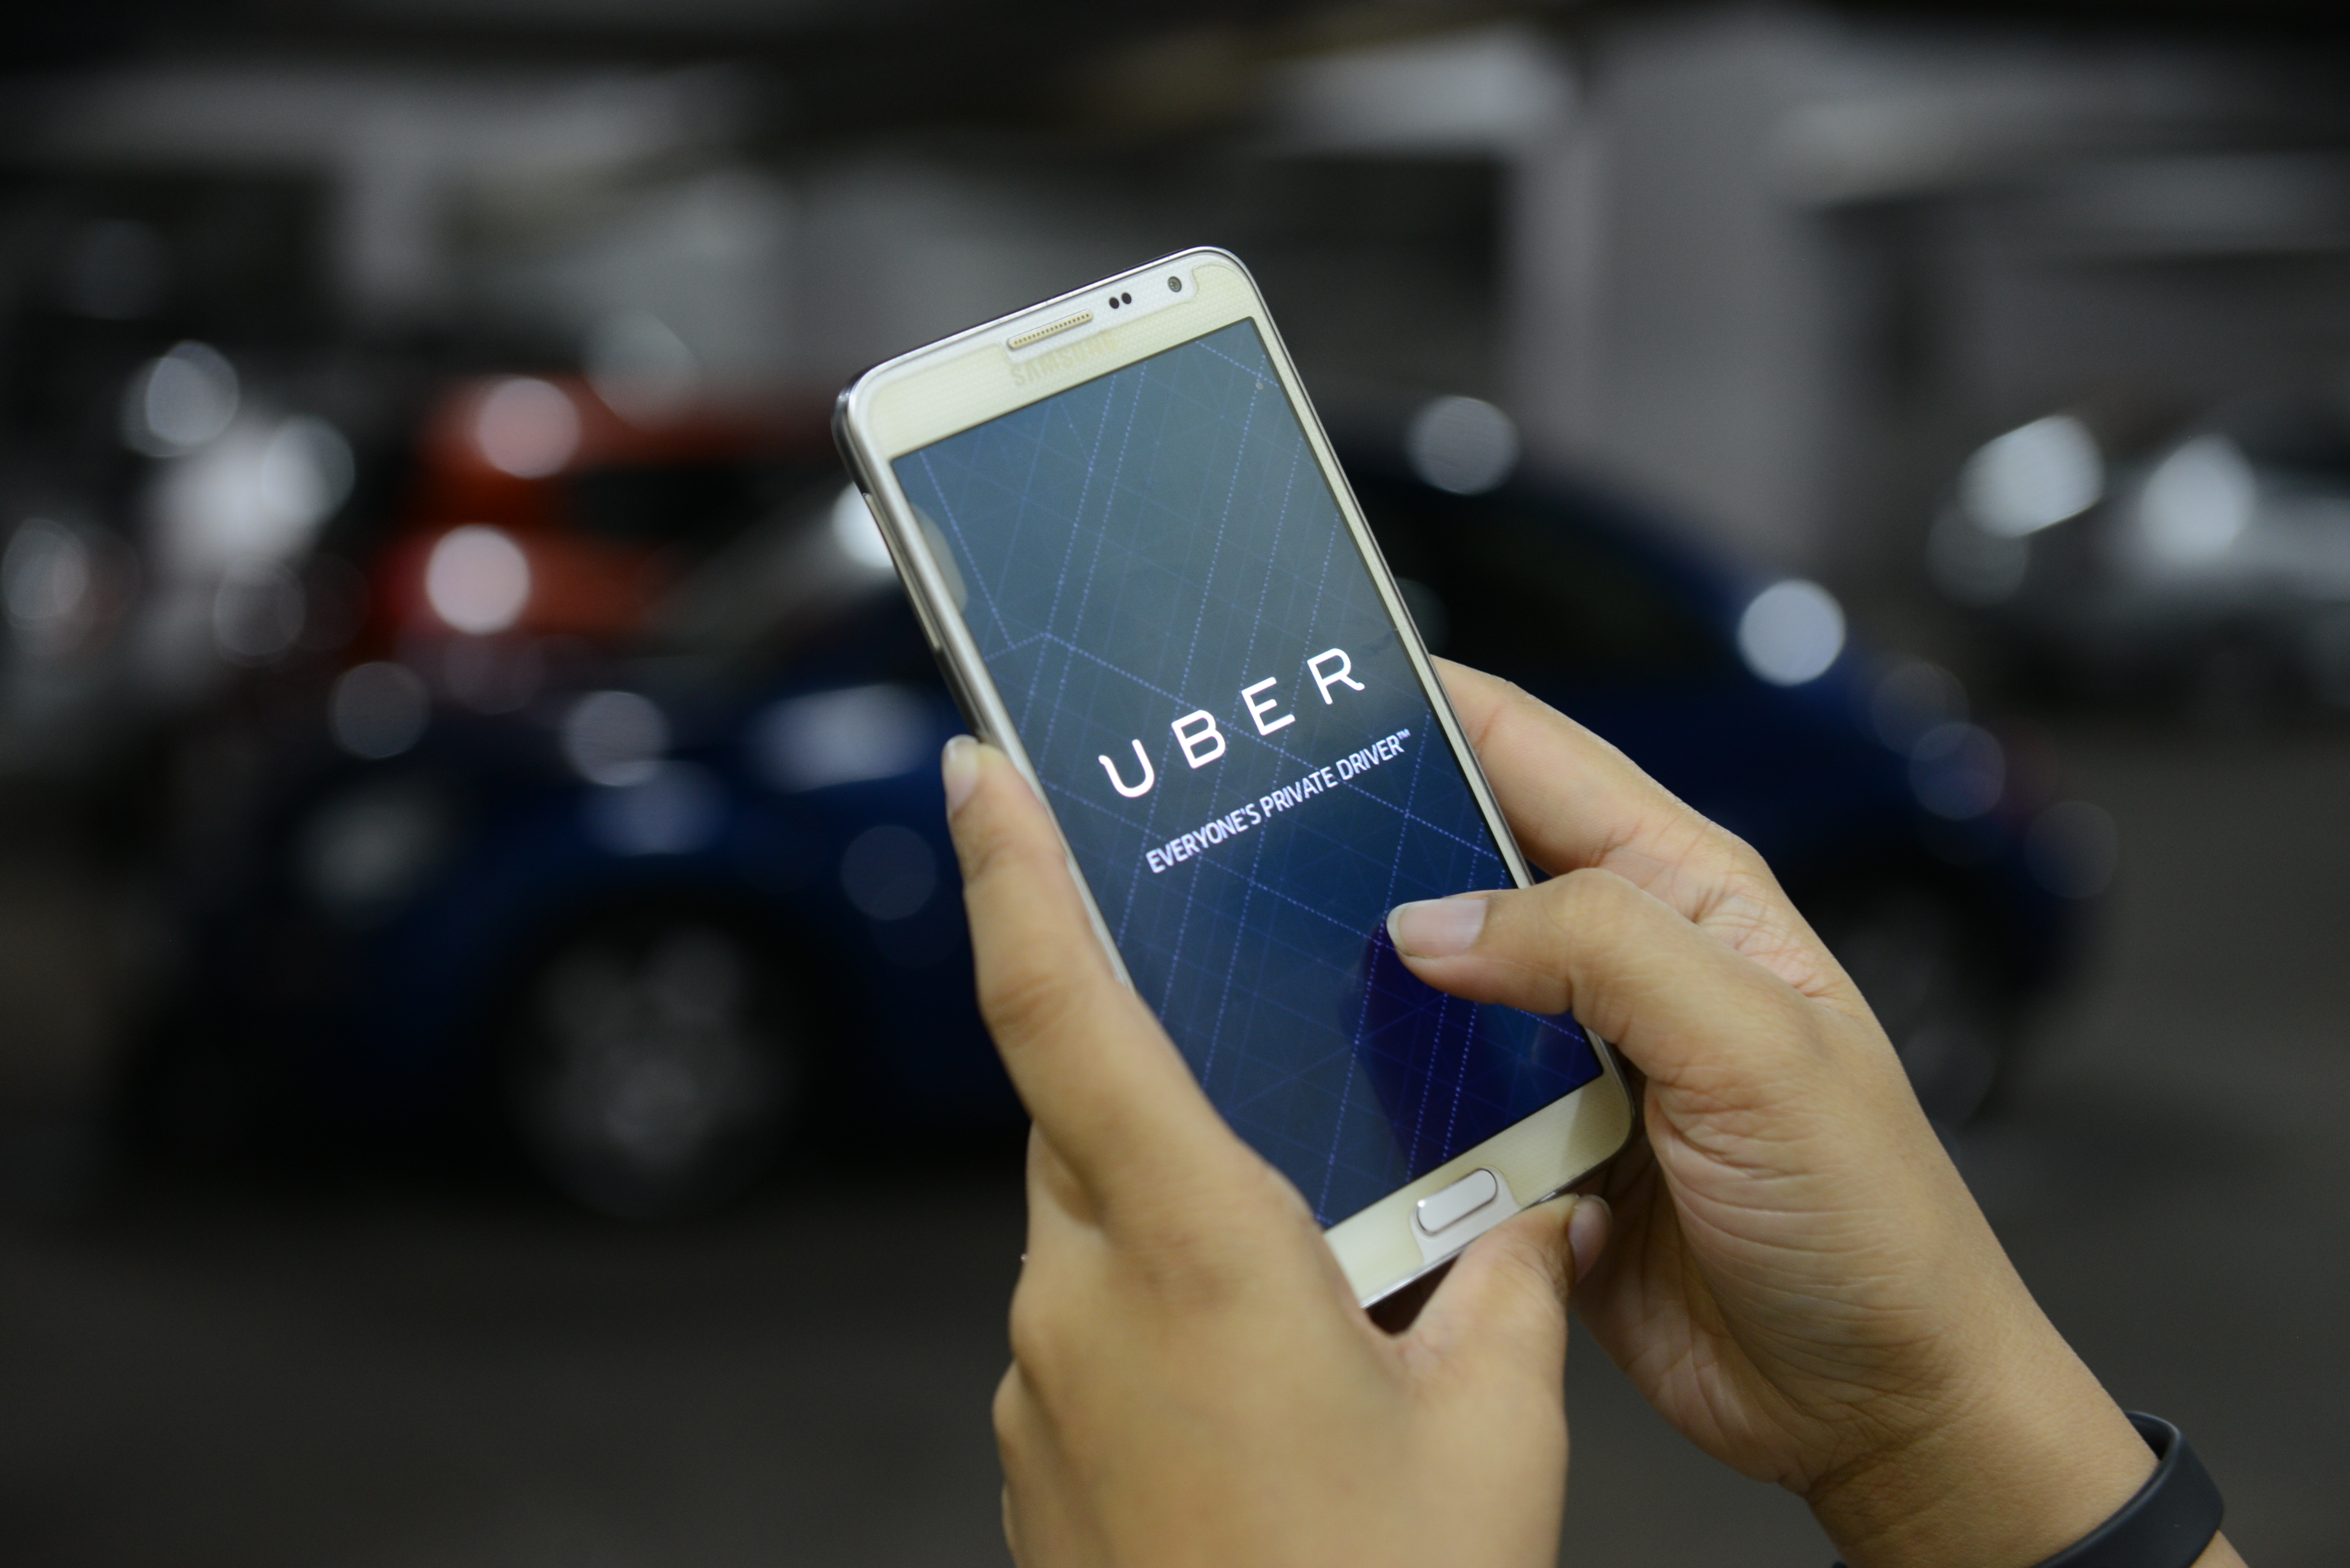 A person is seen using the UBER mobile app on October 01 2015 in Bengaluru, India. (Mint&mdash;Hindustan Times/Getty Images)